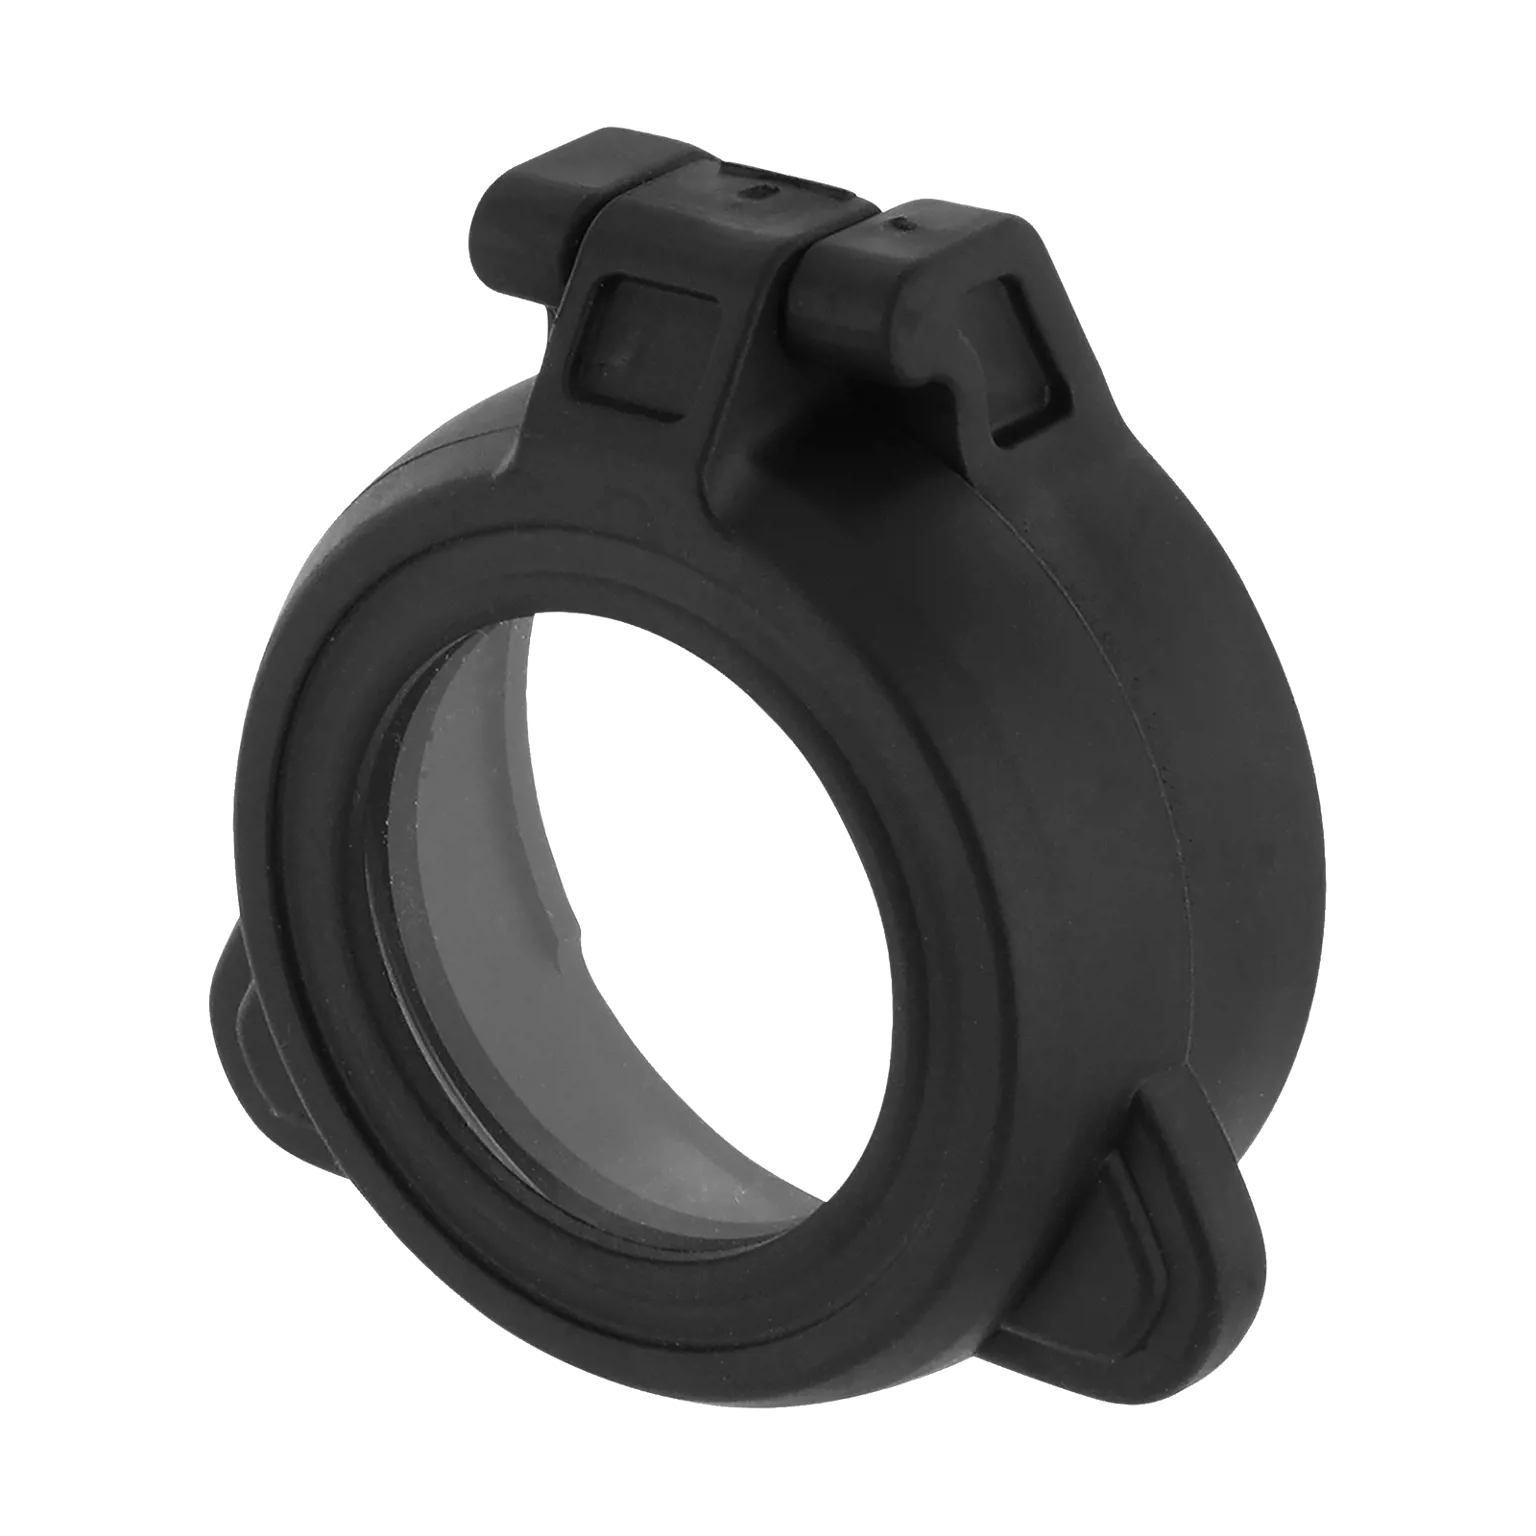 Lens cover flip-up - Rear Transparent for Aimpoint® MPS3 - 1